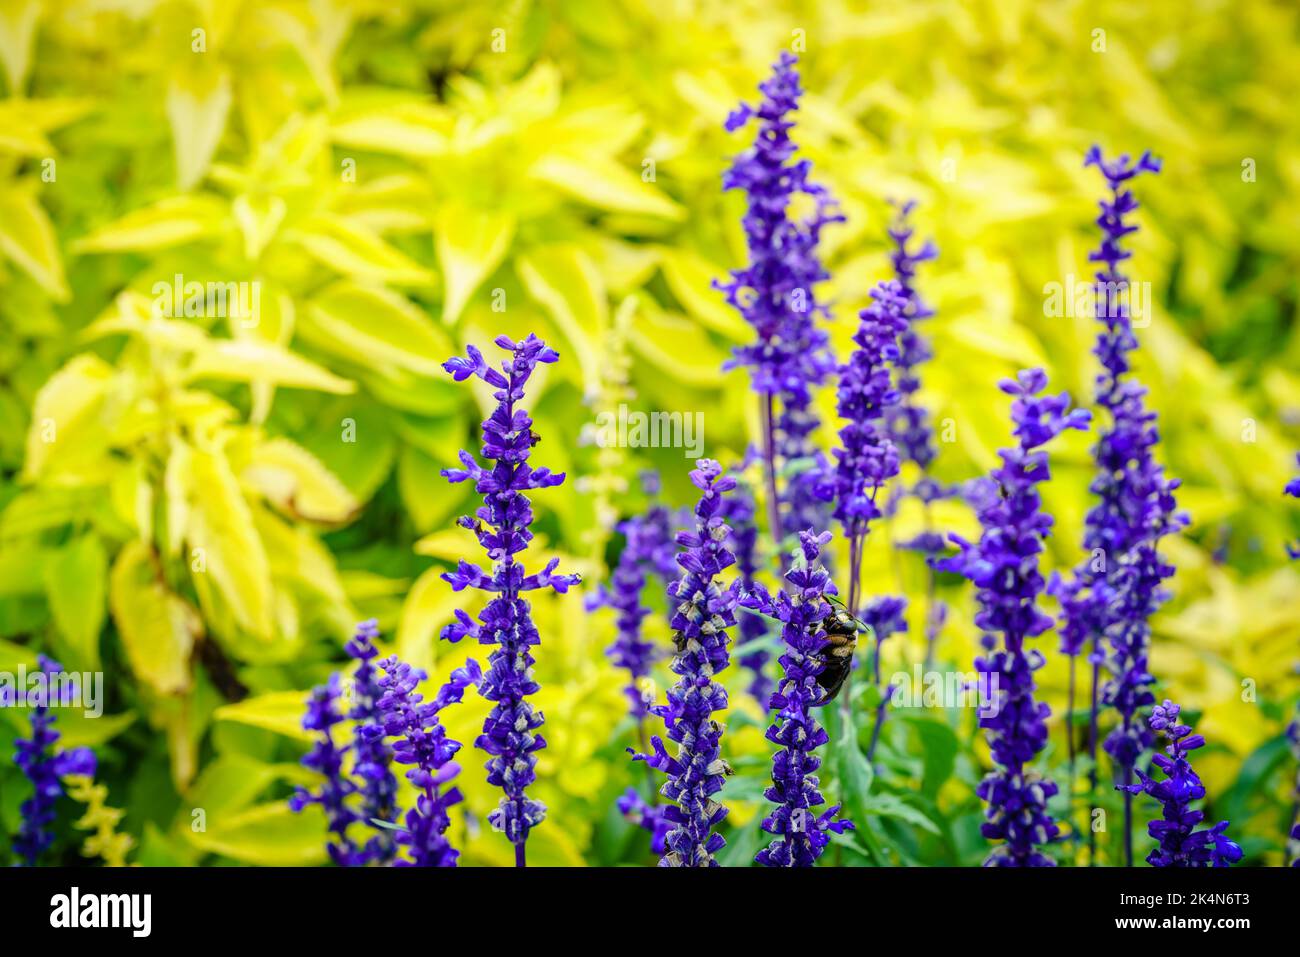 Close-up image of blooming blue sage (Salvia nemarosa) against the background of bright yellow leaves Stock Photo